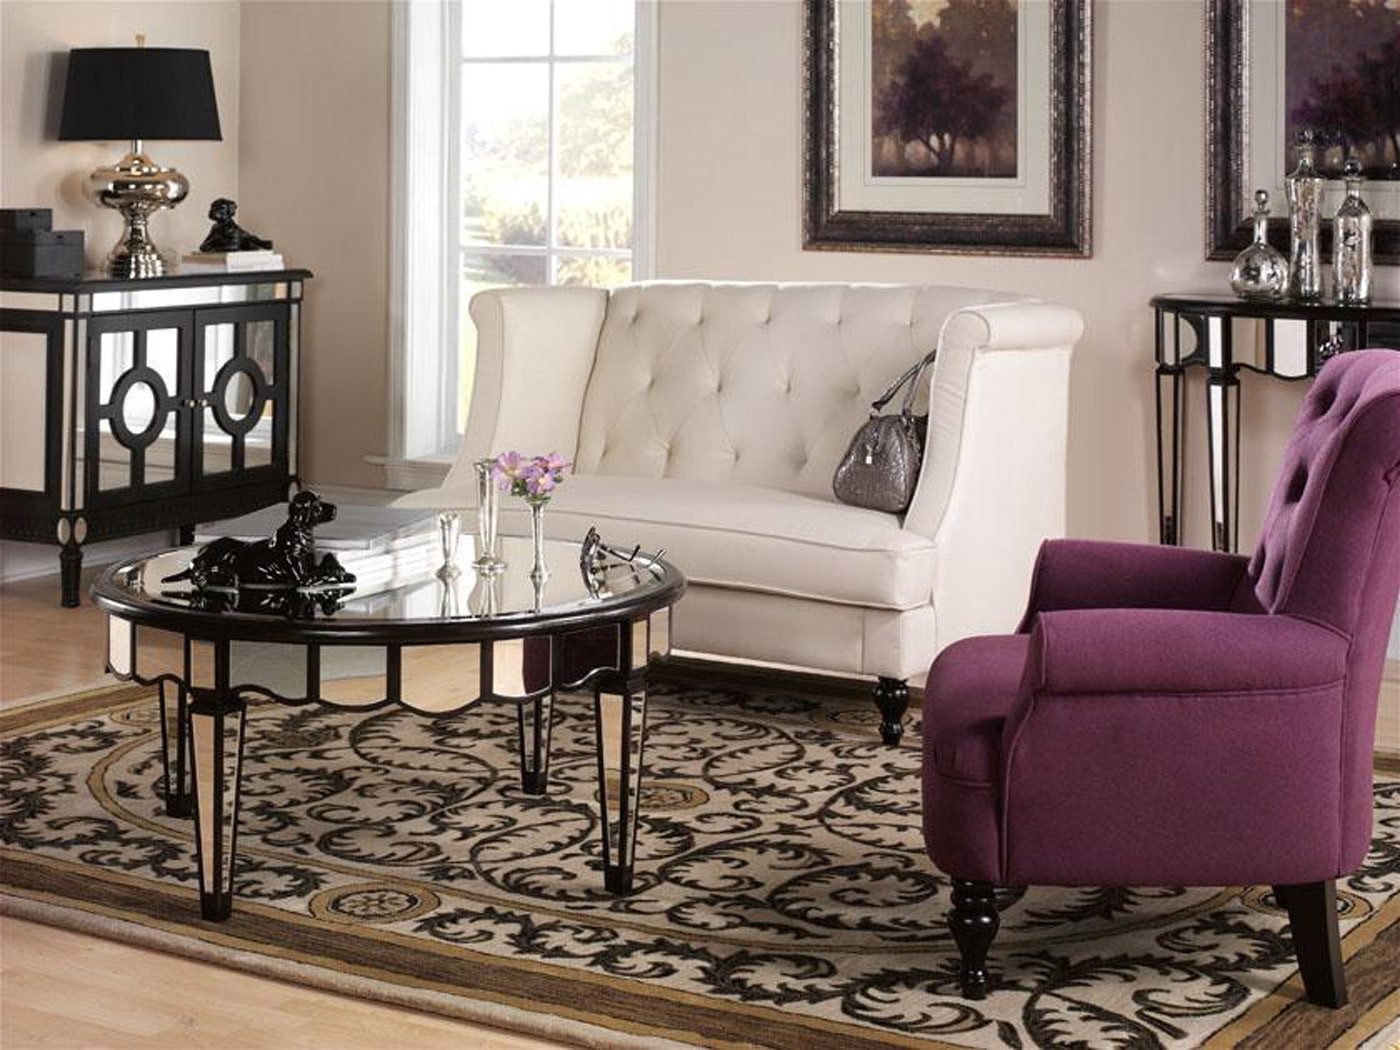 Modern Living Room Tables
 Find Suitable Living Room Furniture With Your Style